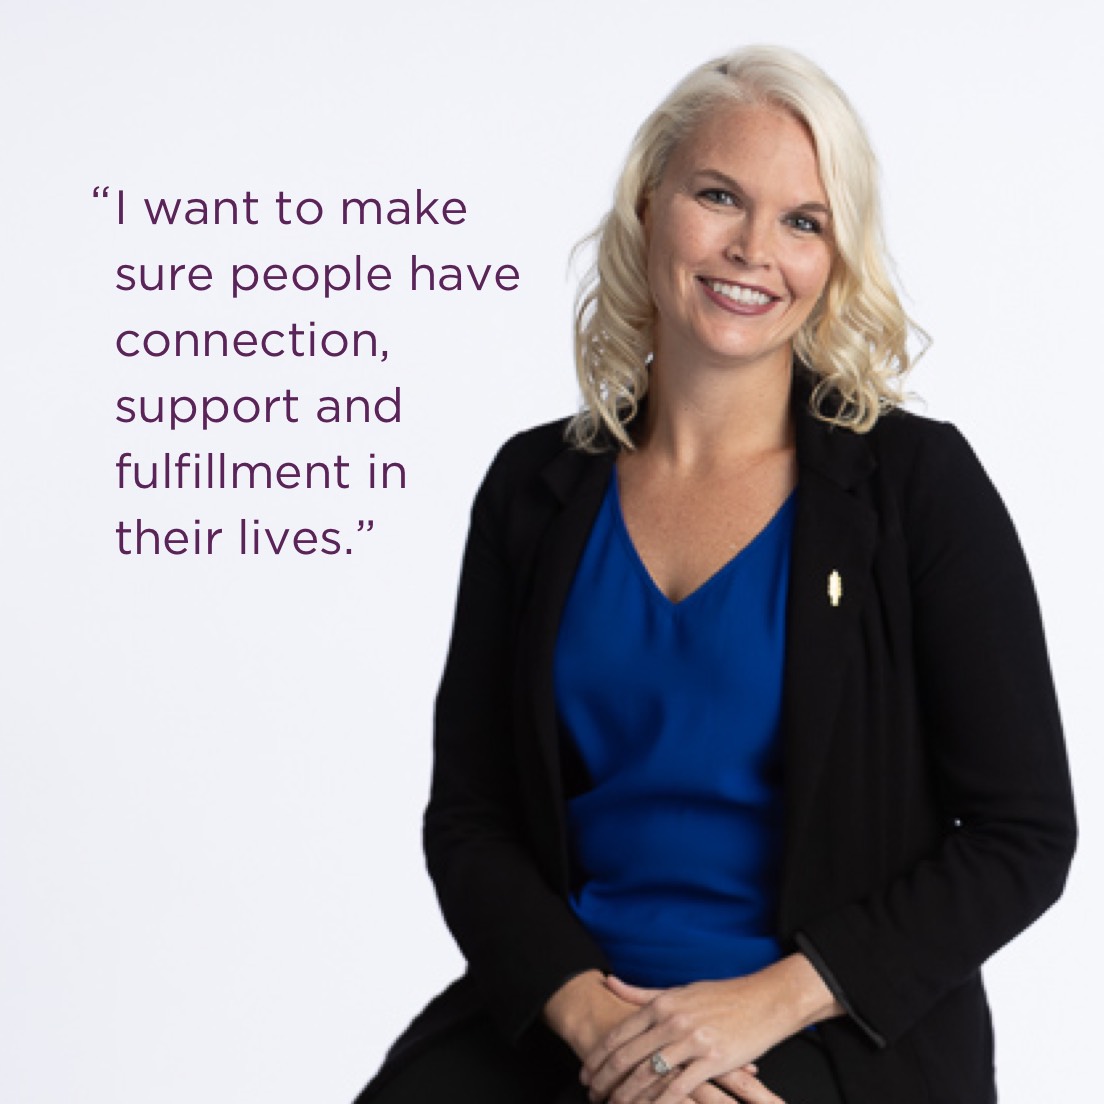 Rhonda Gindlesperger - "I want to make sure people have connection, support and fulfillment in their lives.”